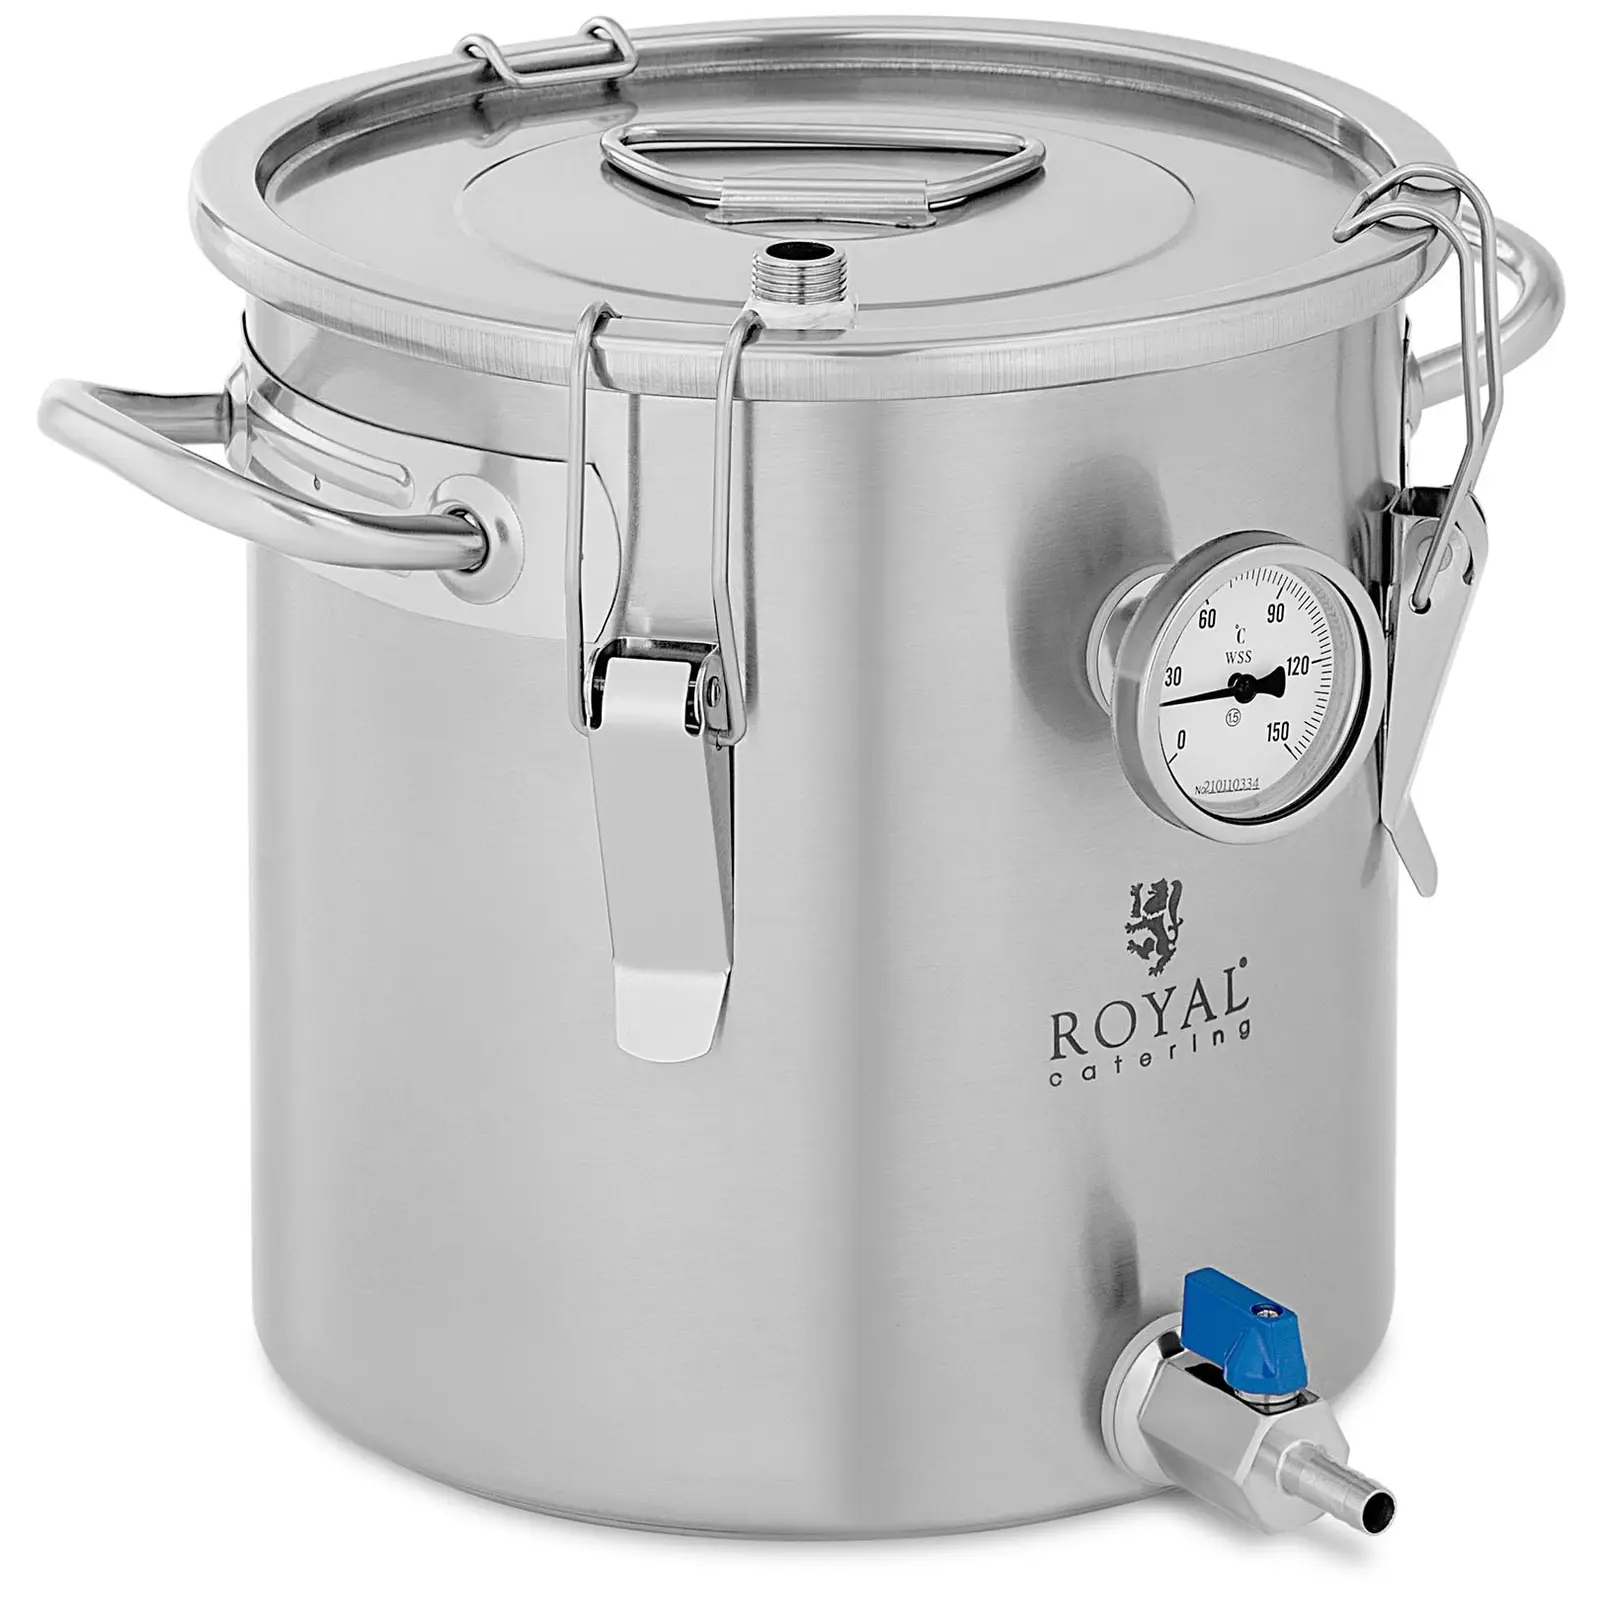 Mash kettle - for beer and wine - 10 L - 0 - 150 °C - stainless steel - double drain